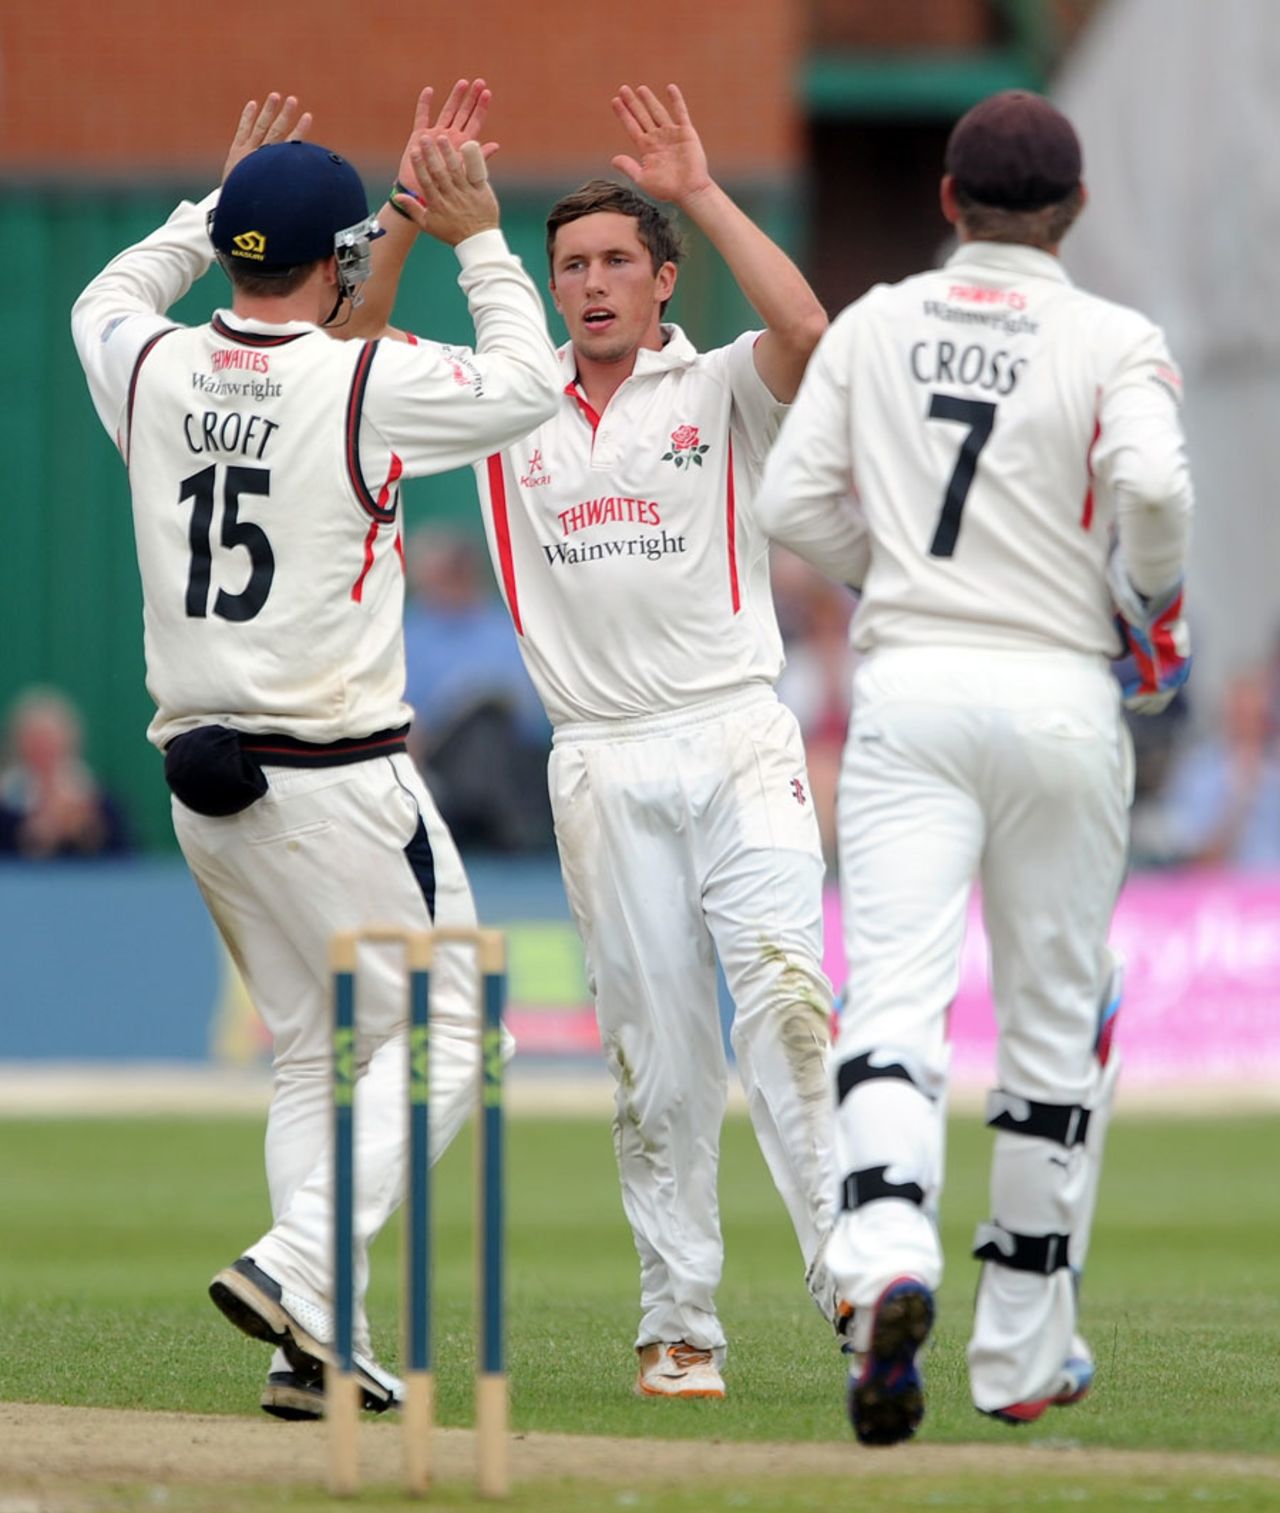 Simon Kerrigan celebrates a dismissal, Lancashire v Somerset, County Championship, Division One, Aigburth, 2nd day, August 2, 2012